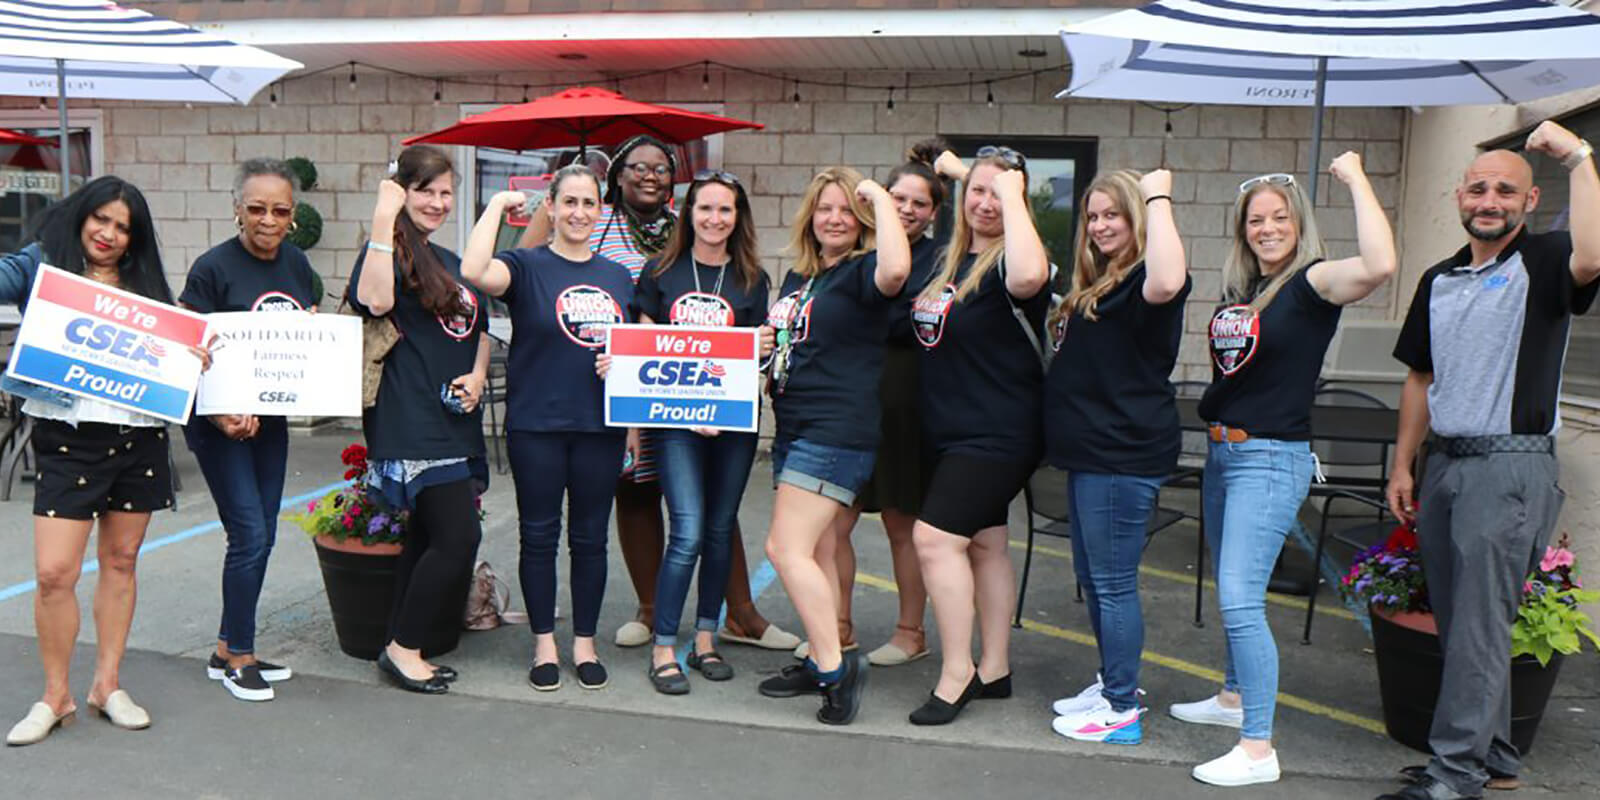 Early childhood educators in New York’s Hudson Valley vote to join CSEA